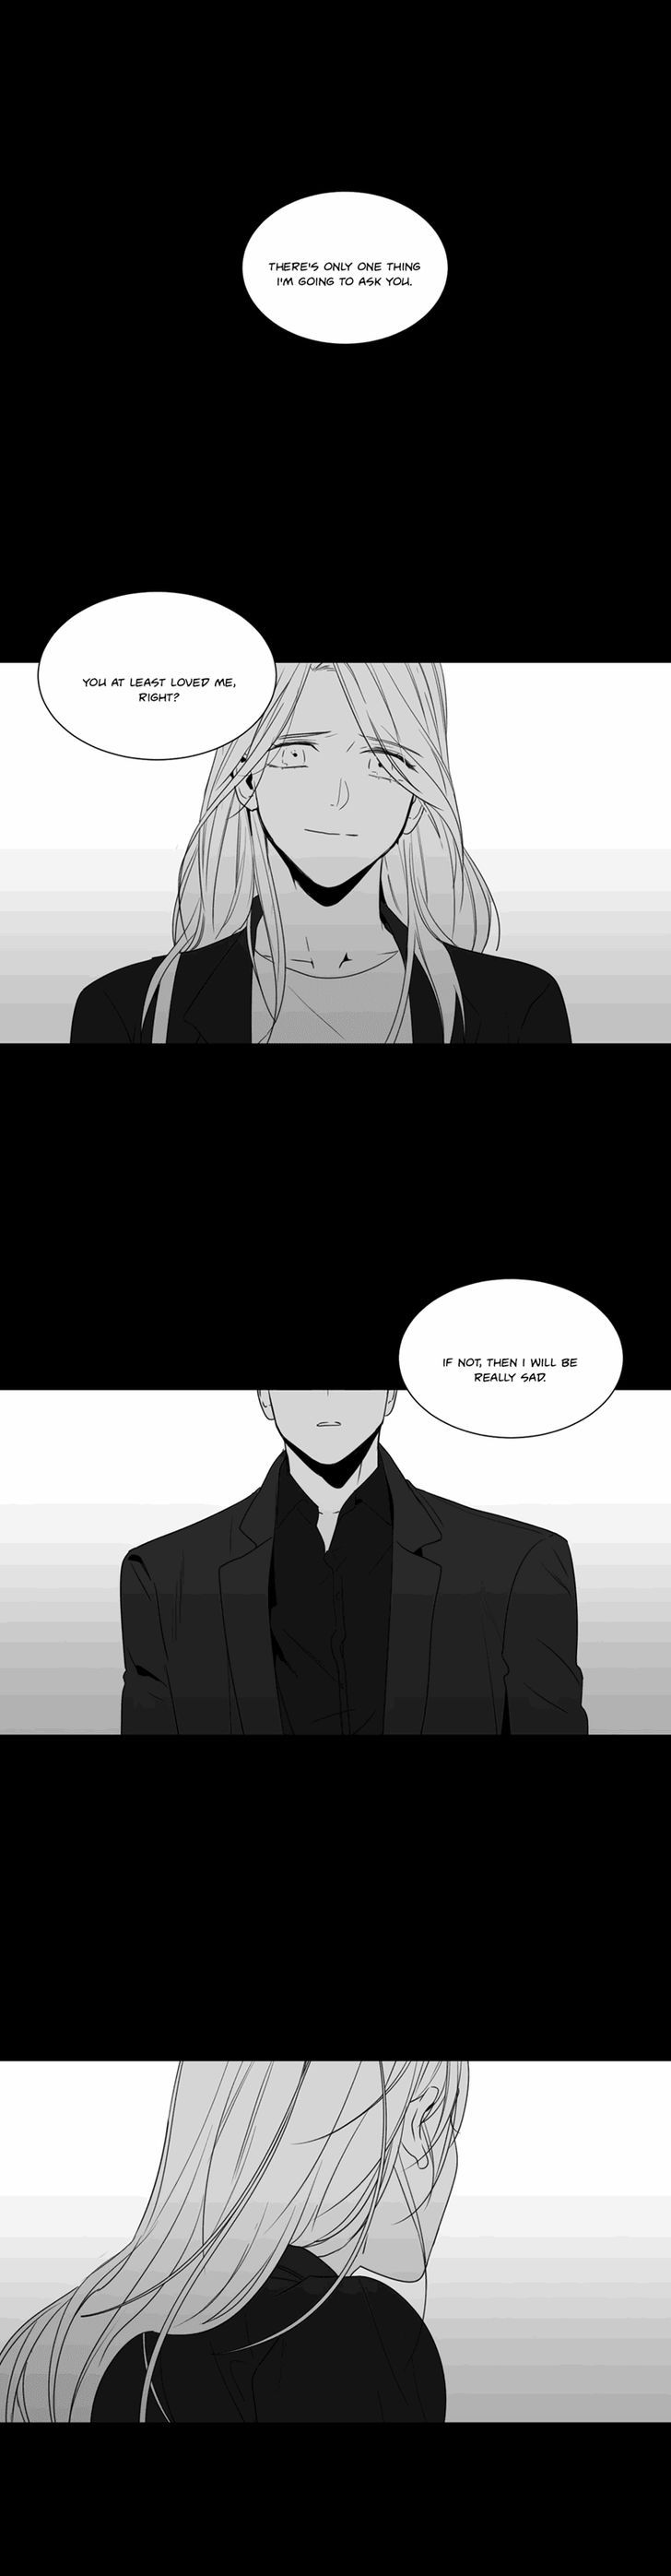 Lover Boy (Lezhin) Chapter 036 page 3